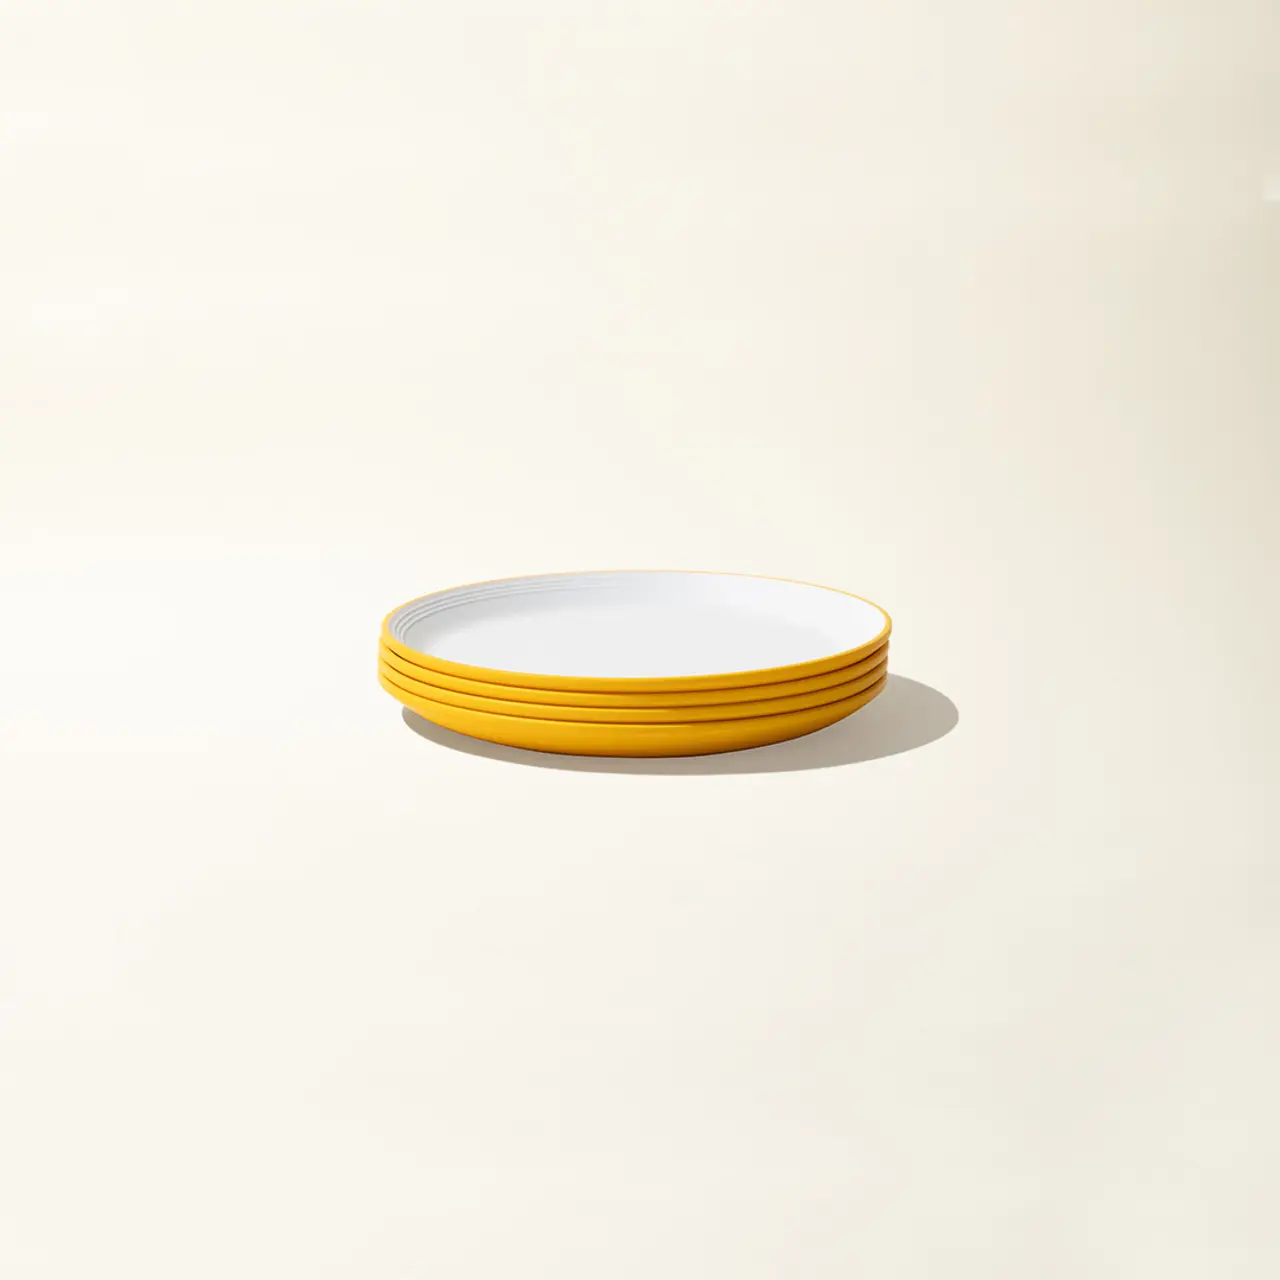 A stack of clean, white plates with yellow rims sits on a pale background.